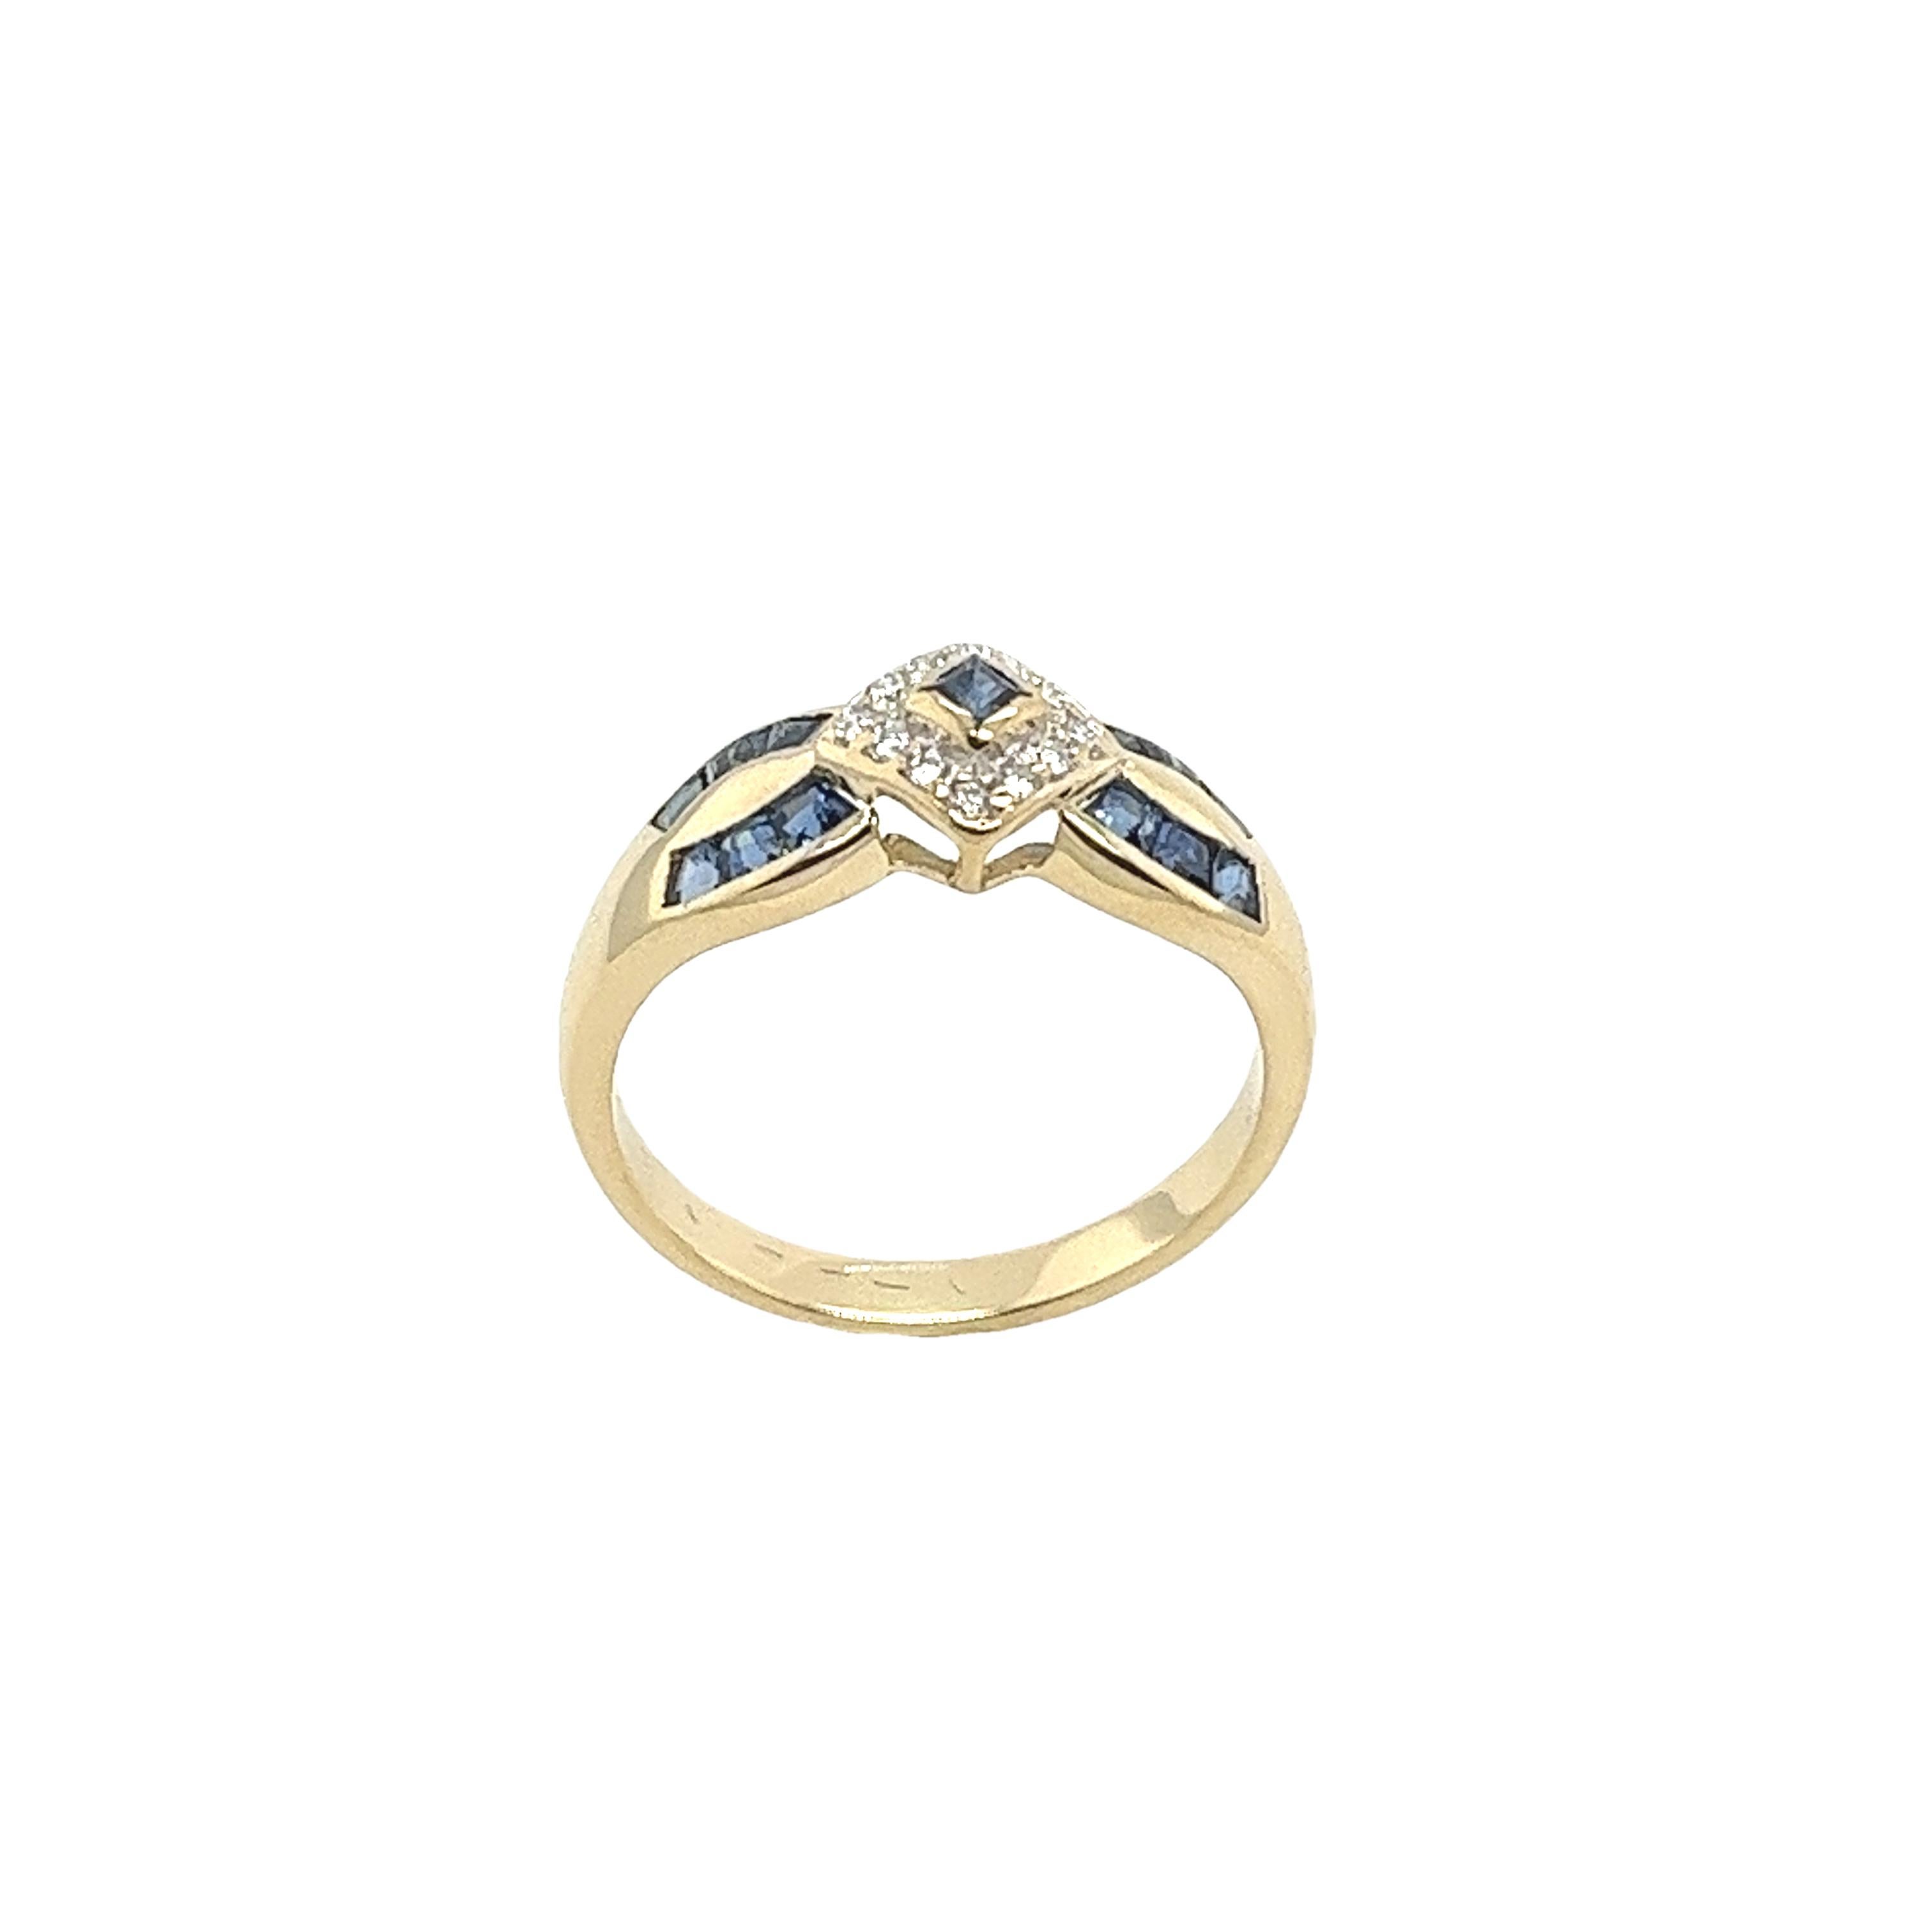 Round Cut Vintage 18ct Yellow & White Gold Diamond Ring Set With 0.12ct Diamonds For Sale